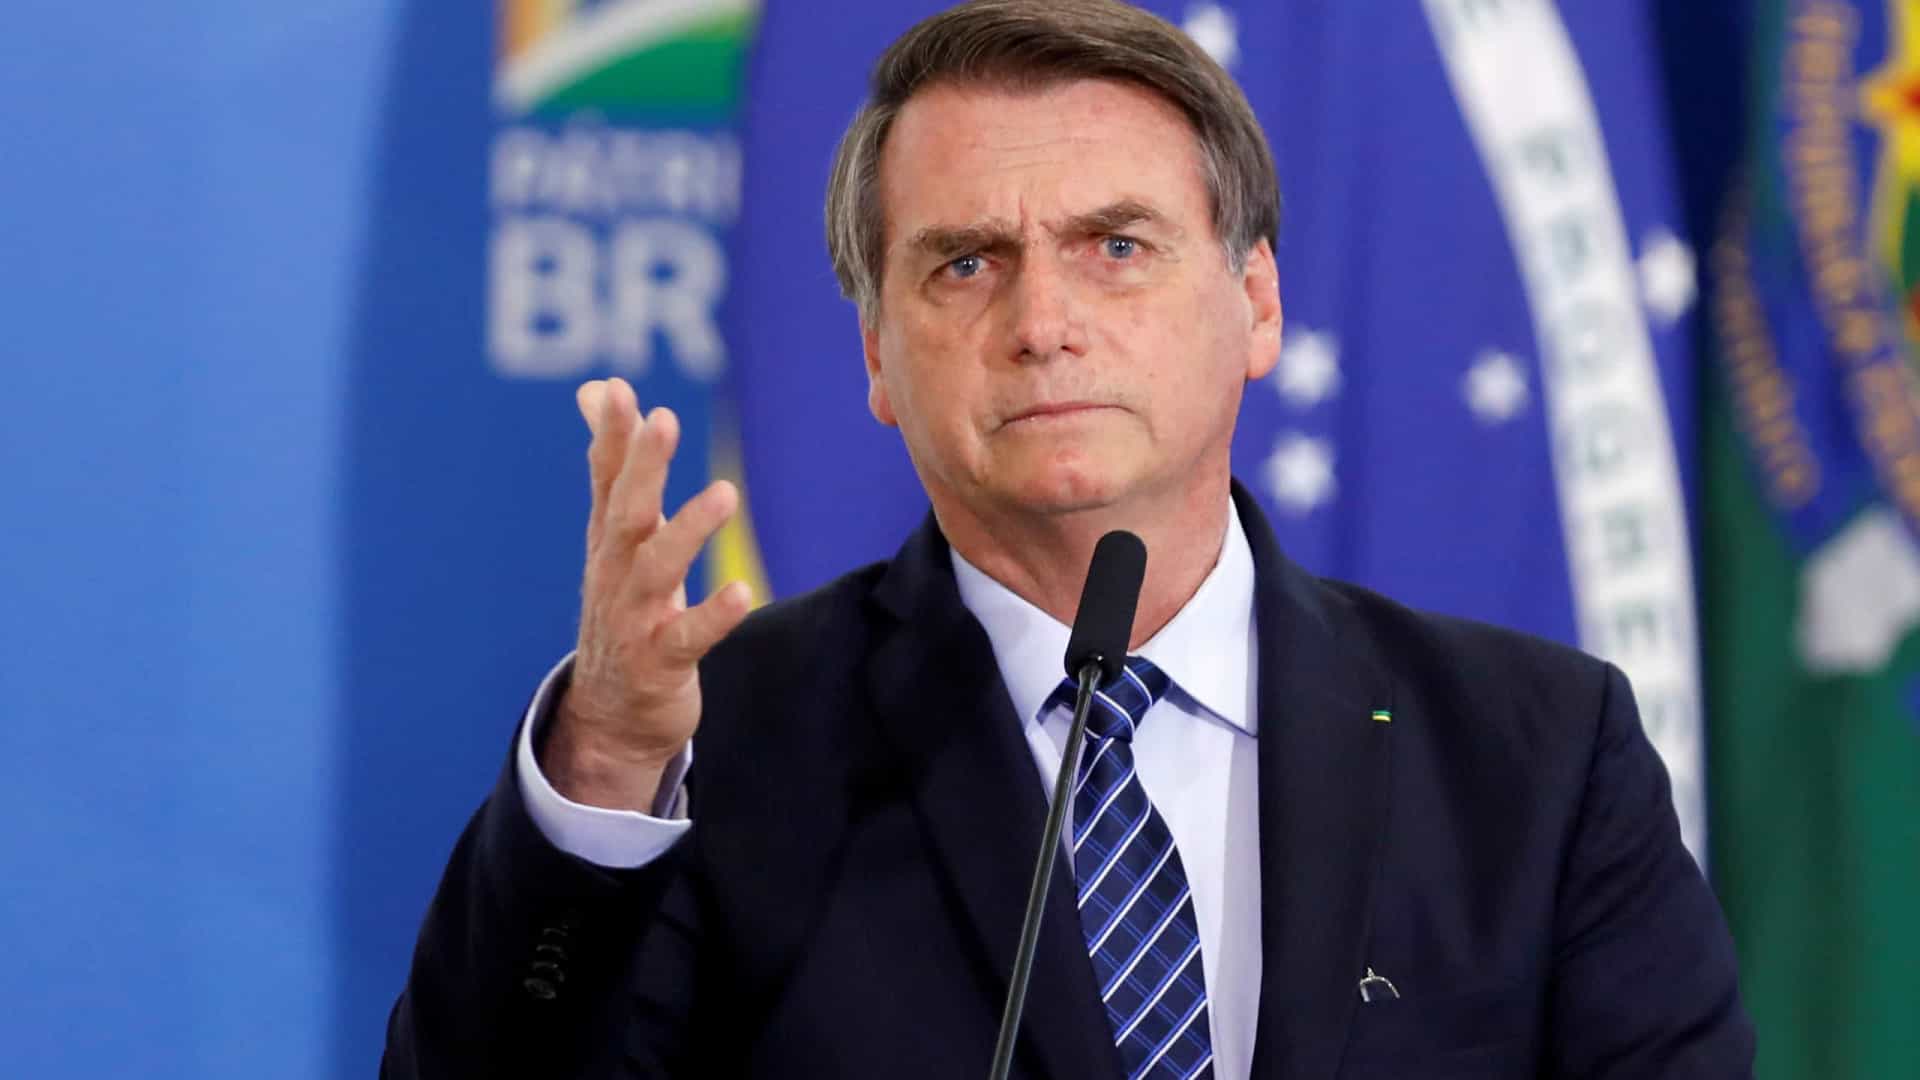 Brazilian President Jair Bolsonaro, a longtime critic of stay-at-home measures to combat the coronavirus pandemic, said on Thursday, October 29th, that it was “crazy” for countries to start locking down again to control second waves of the virus.